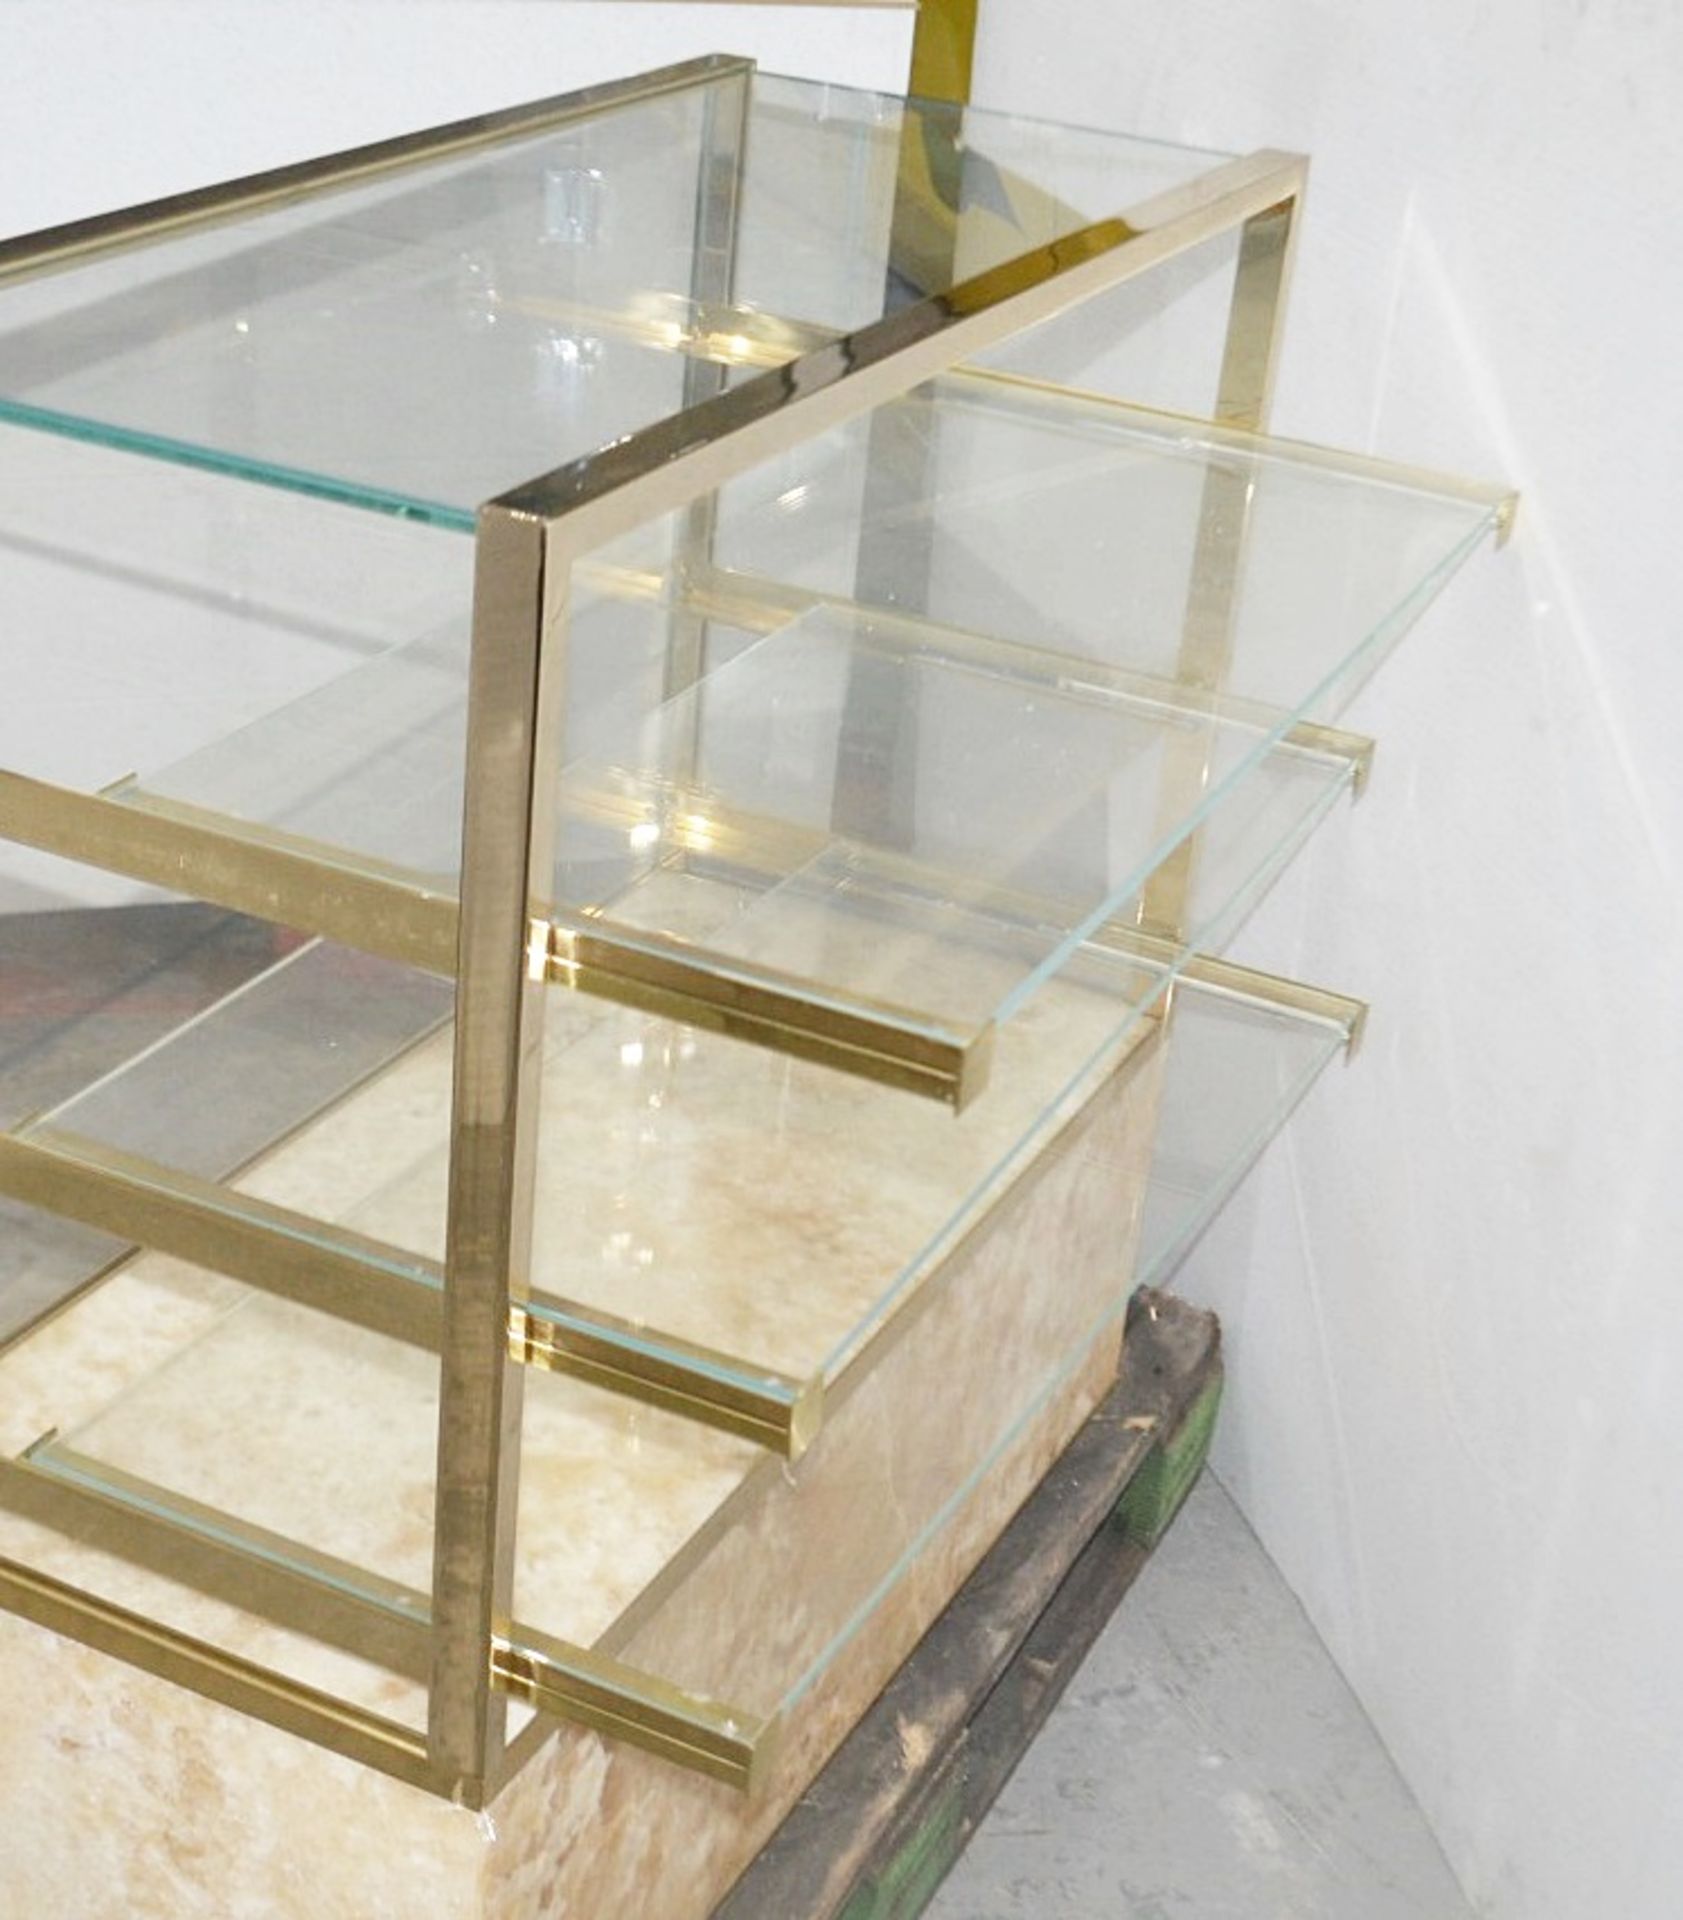 1 x 3-Tier Glass Retail Display Case With Natural Stone Base And Drawer Fronts - Image 3 of 5